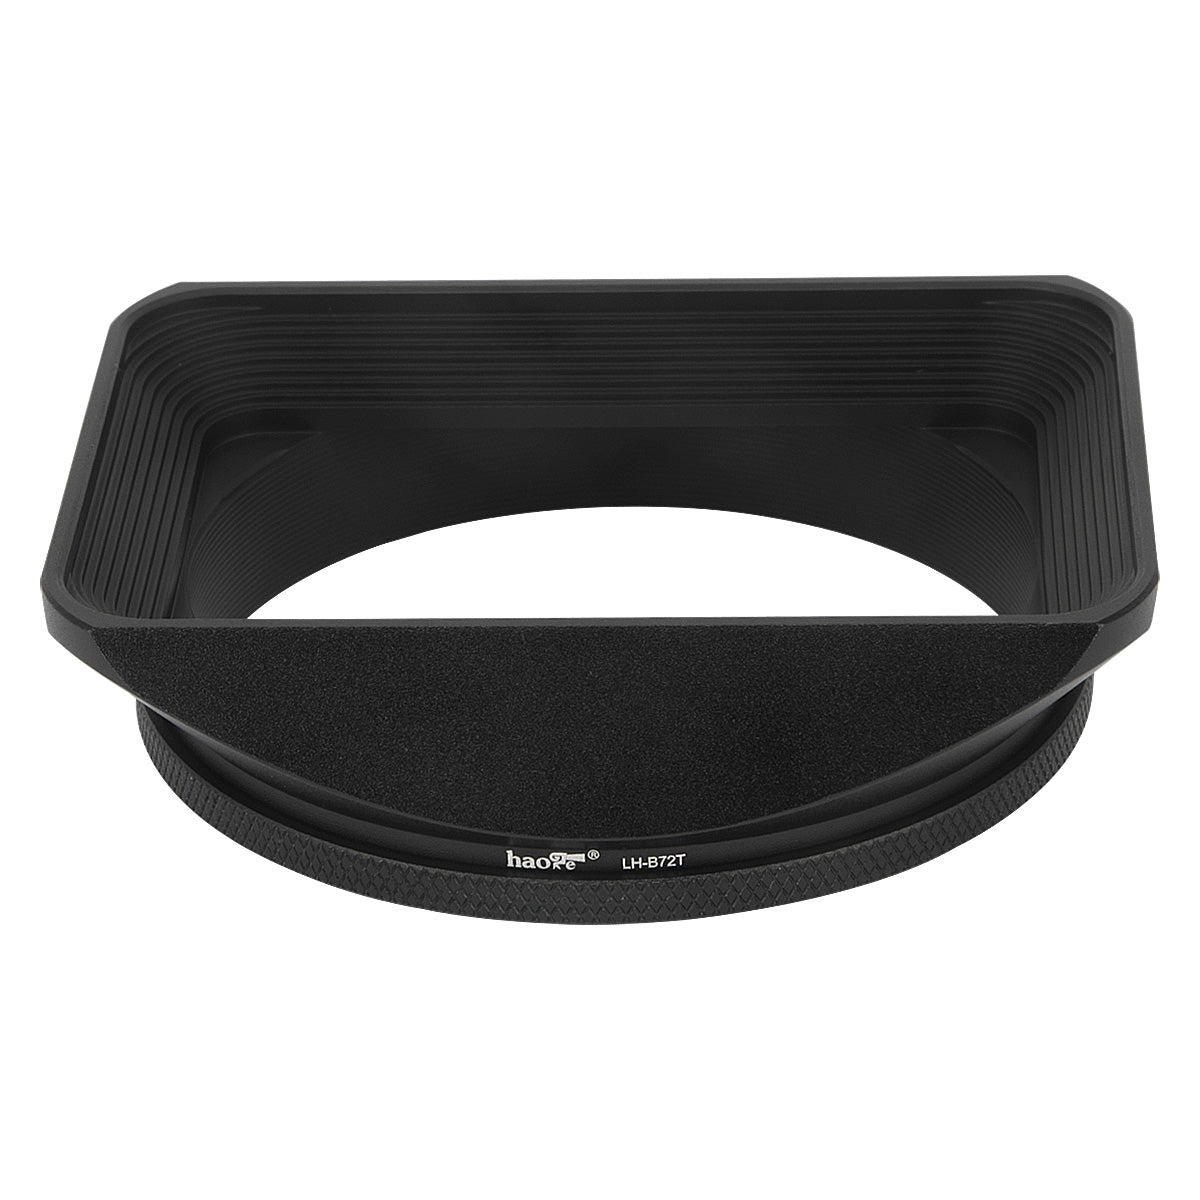 Haoge 72mm Square Metal Screw-in Mount Lens Hood Shade with Cap for 72mm Canon Nikon Sony Leica Leitz Carl Zeiss Voigtlander Nikkor Panasonic Fujifilm Olympus Lens and Other 72mm Filter Thread Lens